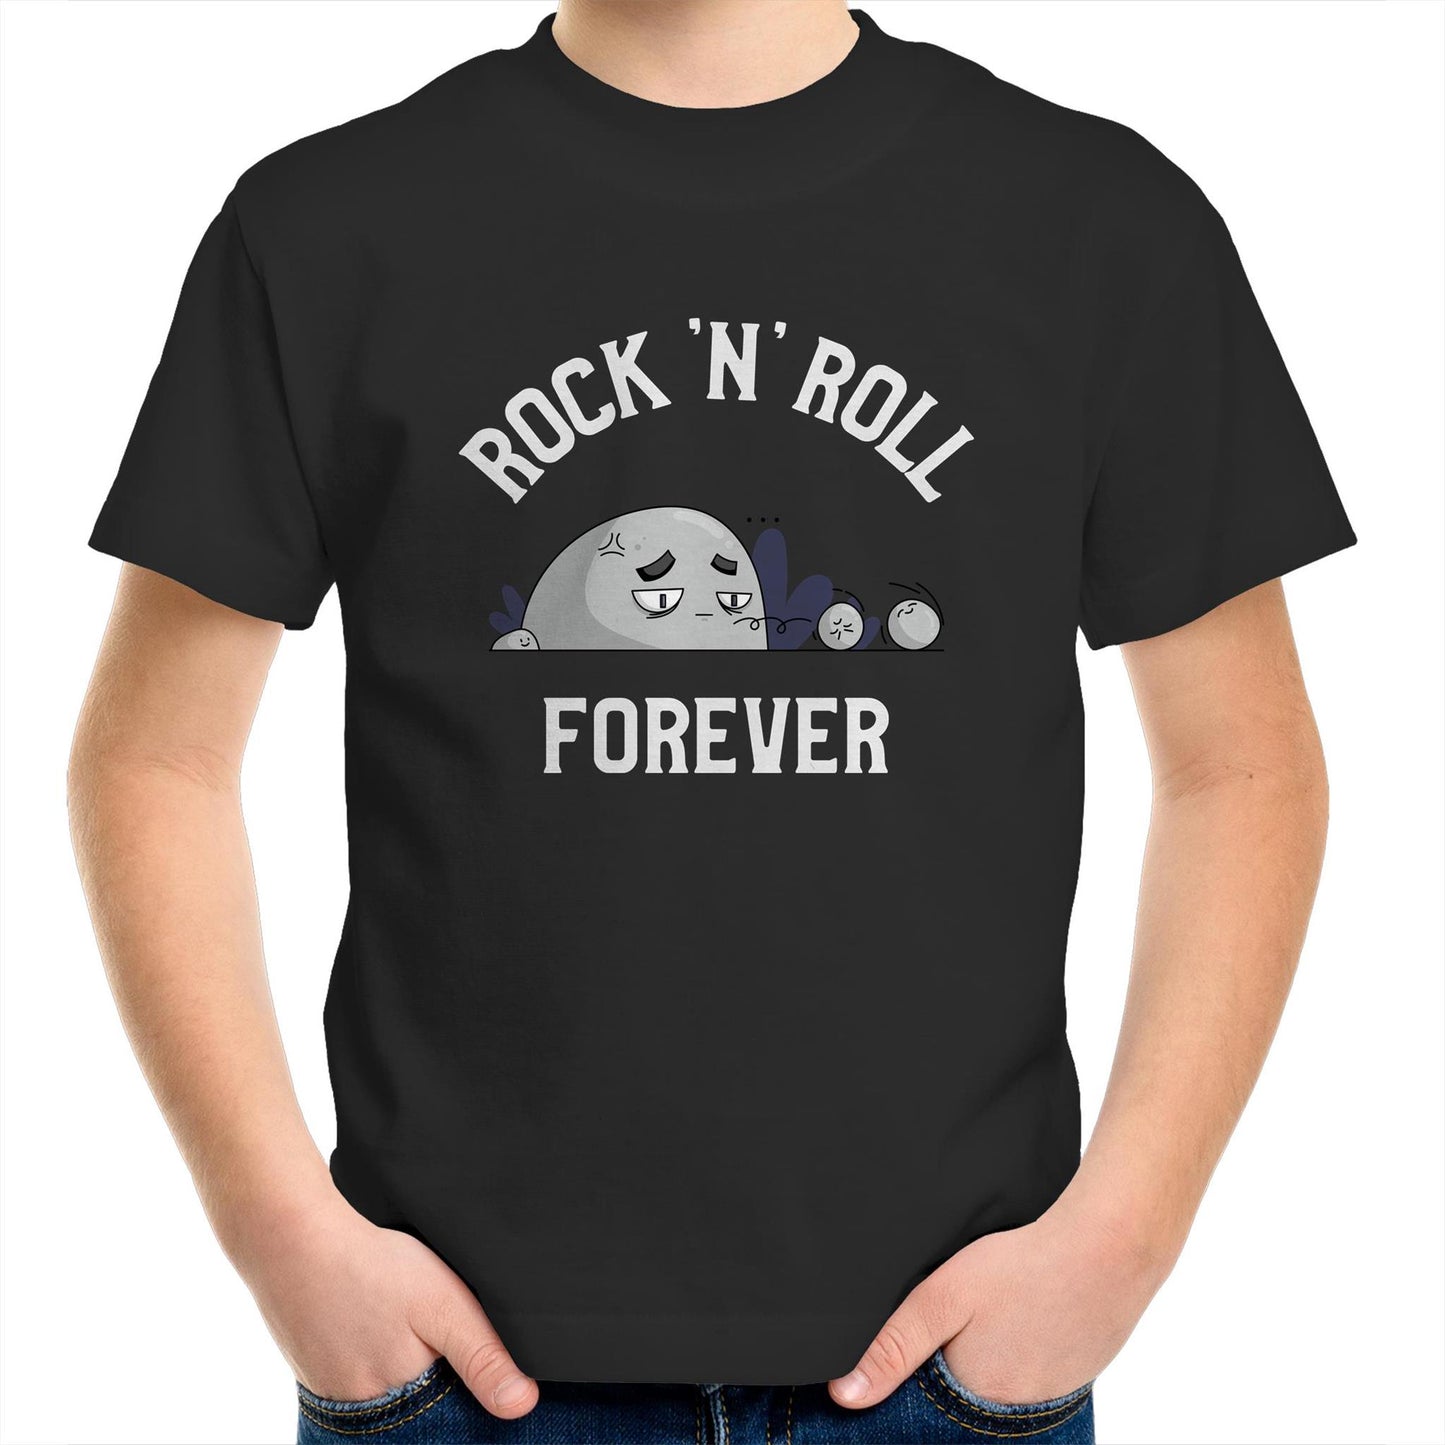 Rock 'N' Roll Forever - Kids Youth T-Shirt Black Kids Youth T-shirt Music